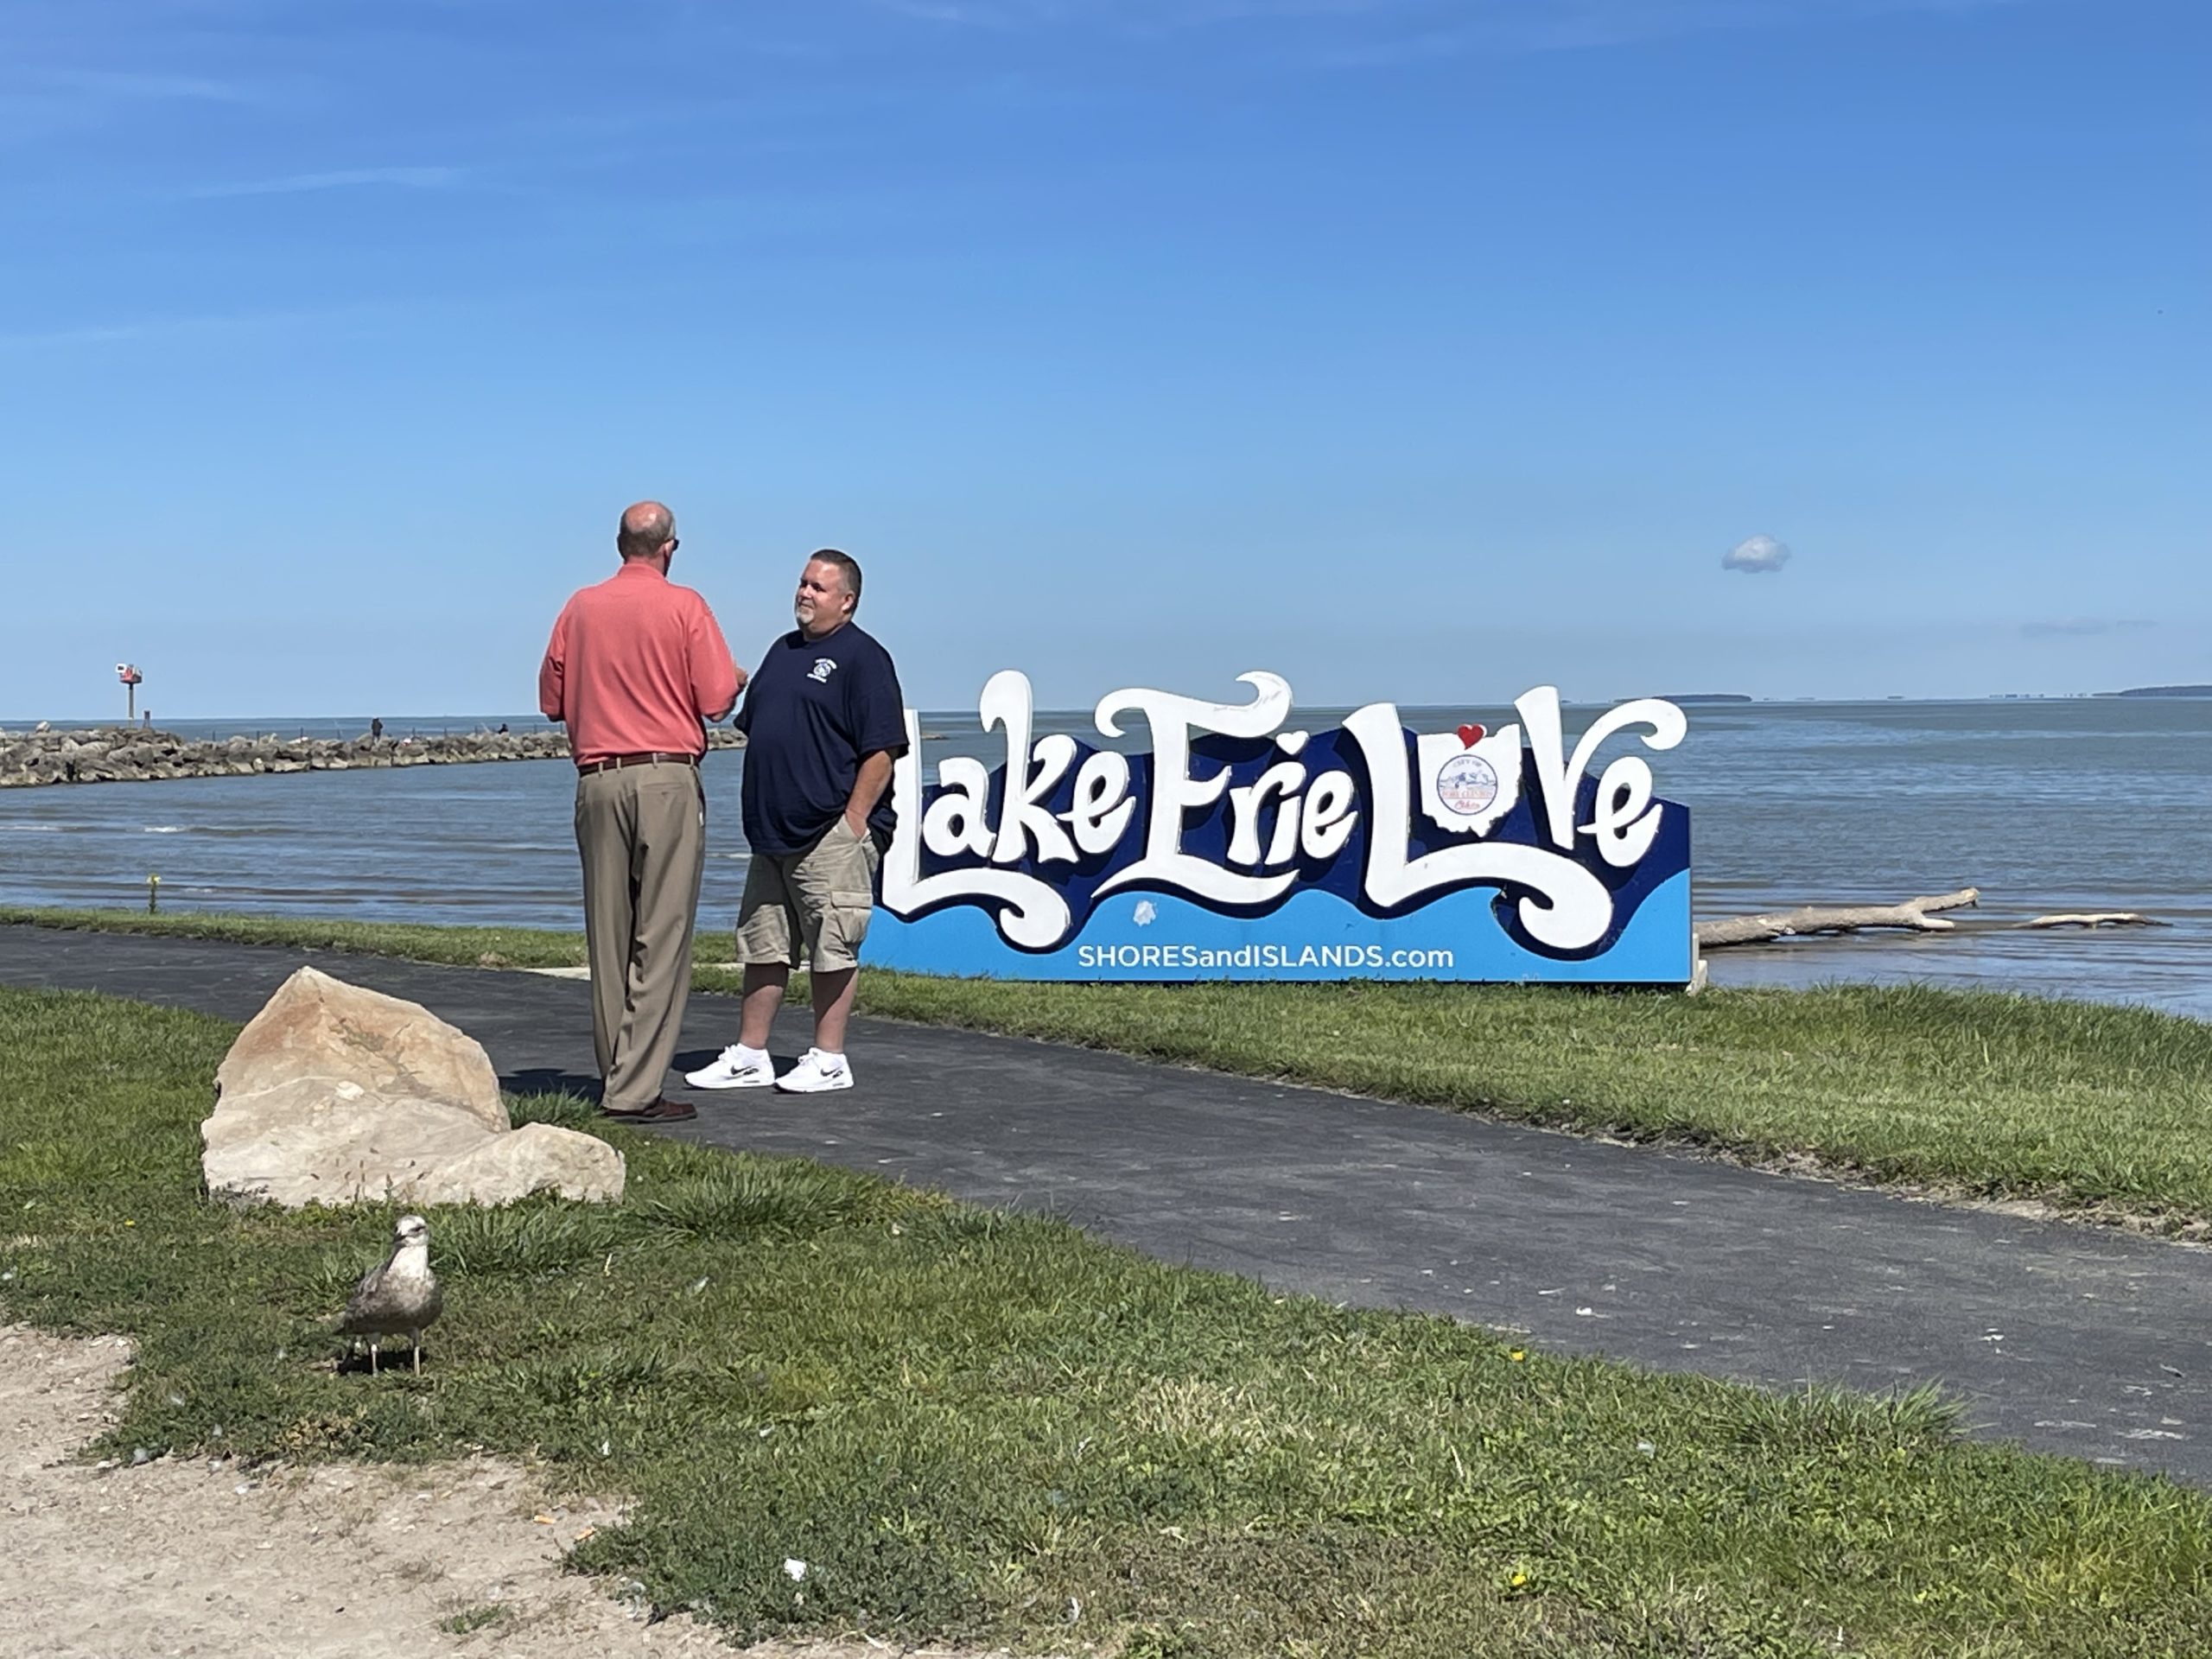 Port Clinton Mayor Mike Snider chats with a resident in front of a "Lake Erie Love" sign